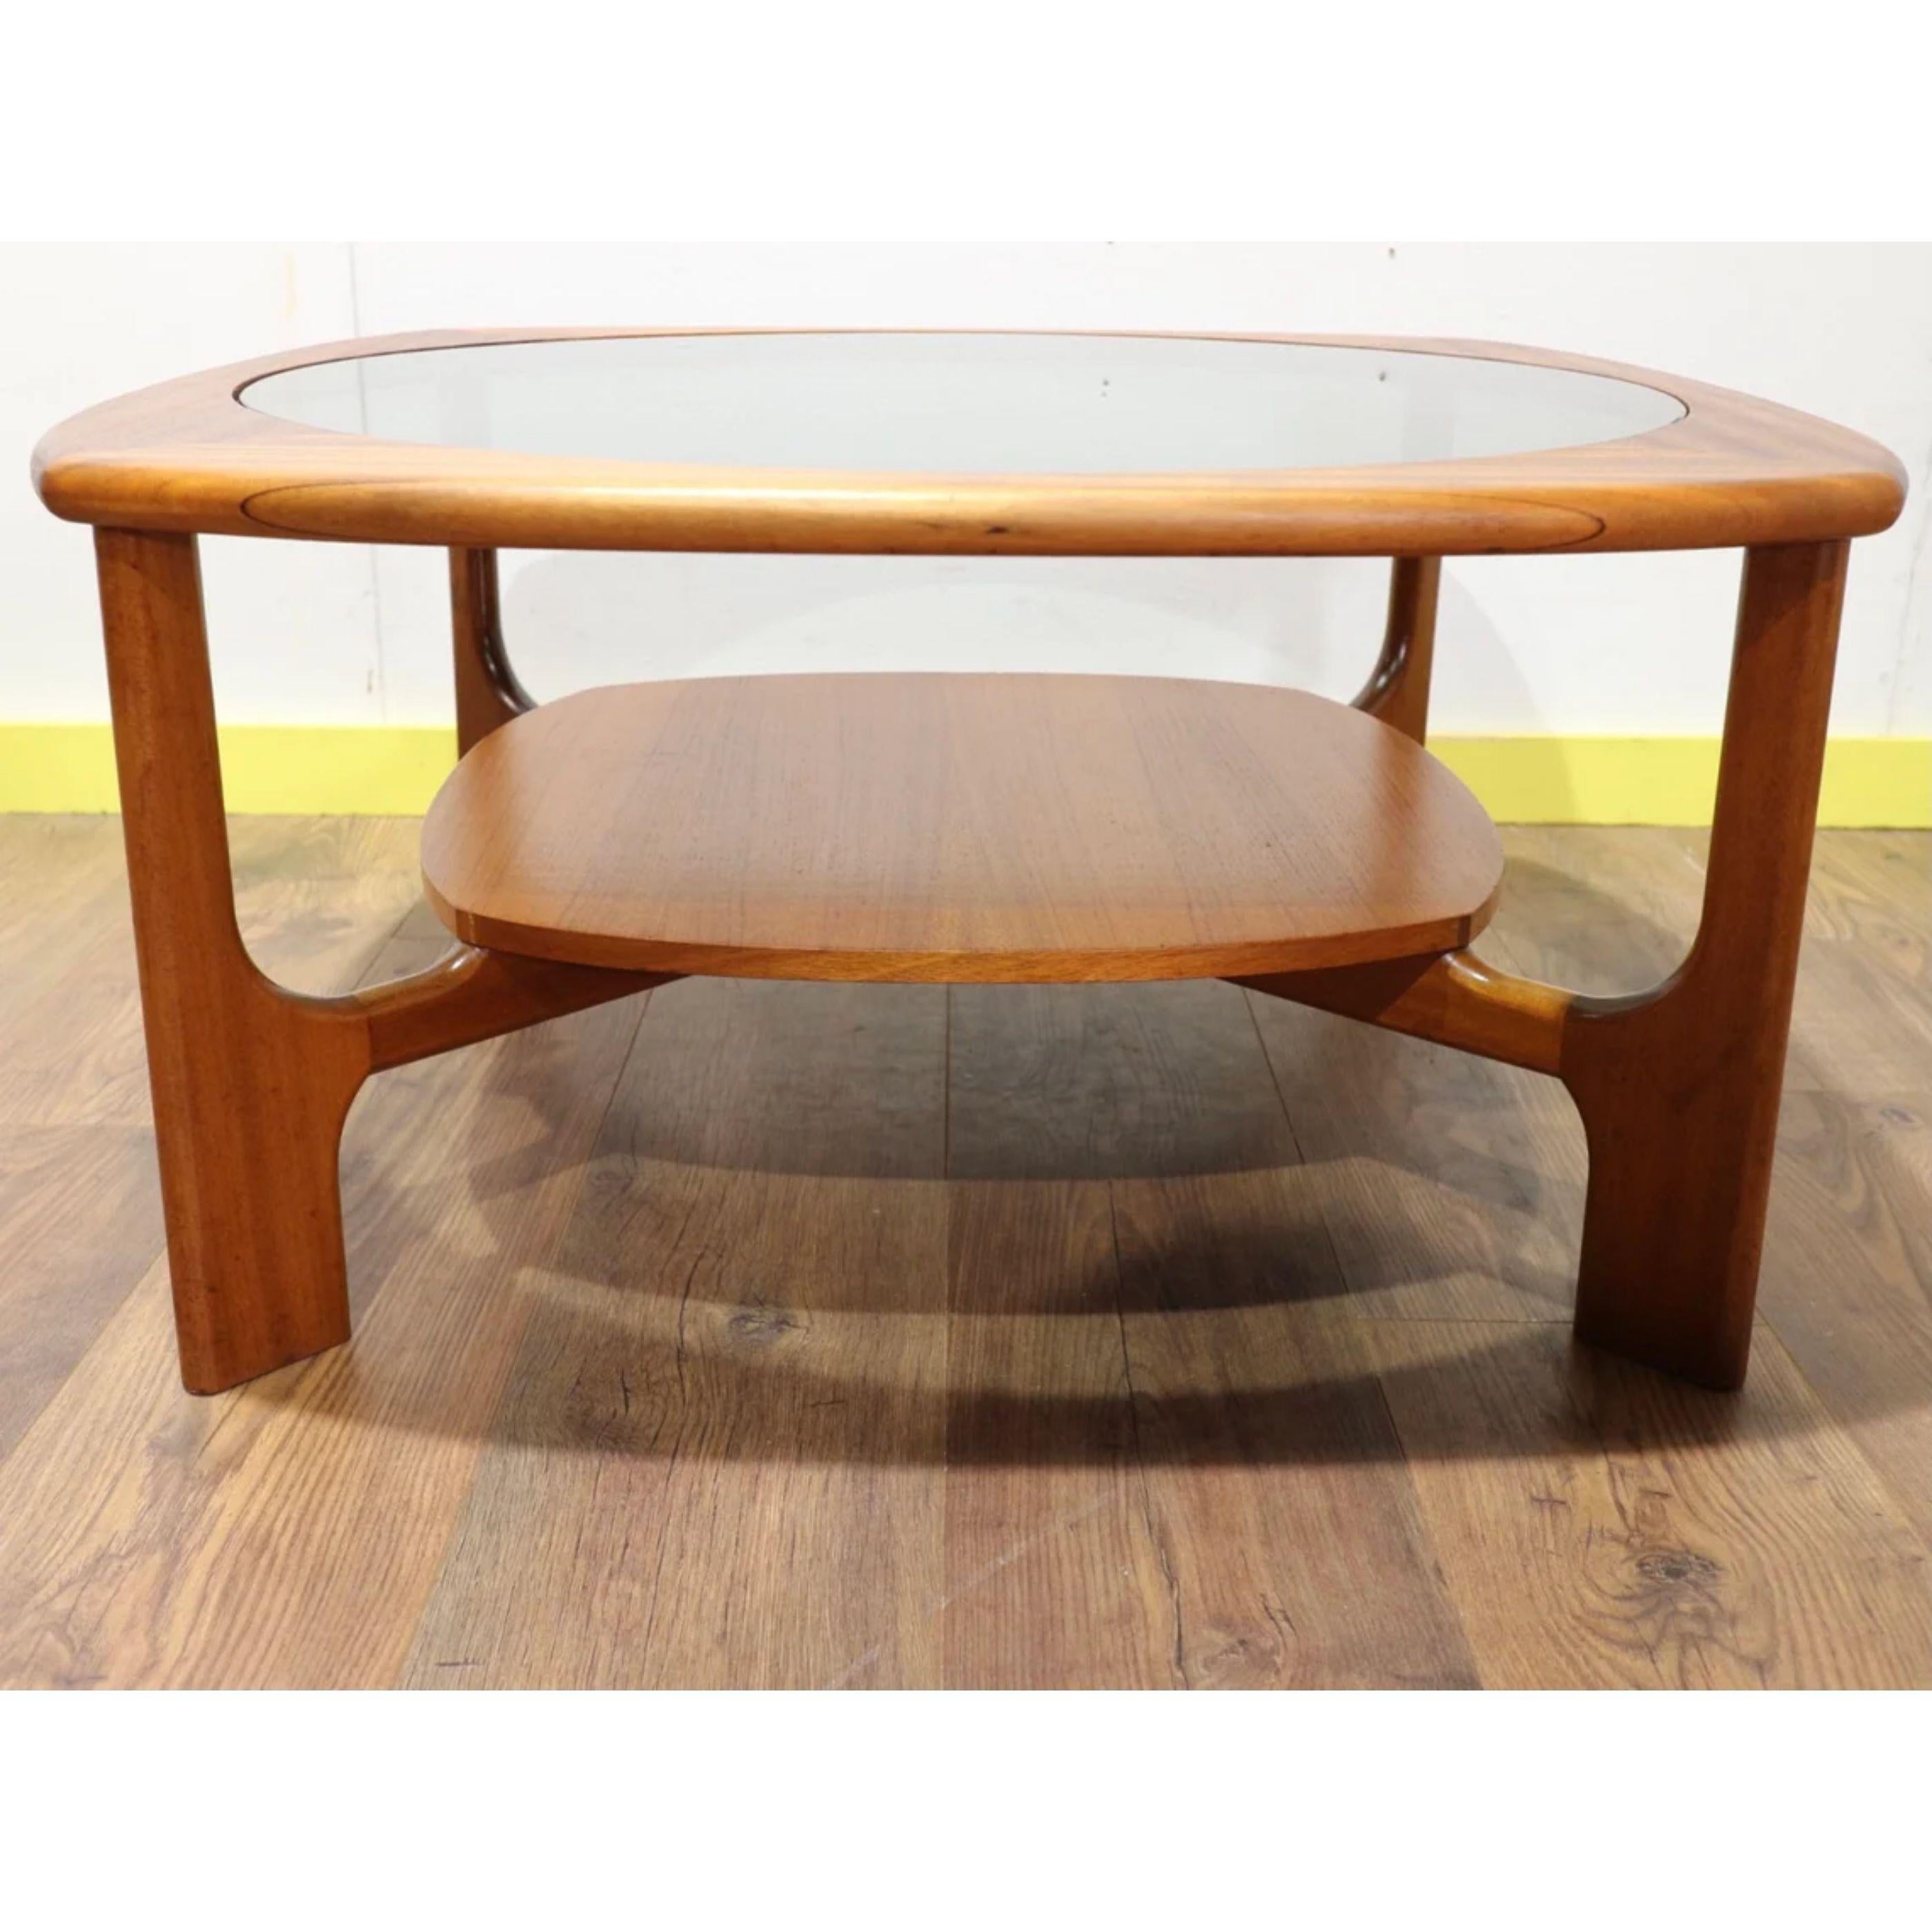 20th Century Mid Century Modern Round Teak and Glass Coffee Table from Stonehill Danish Style